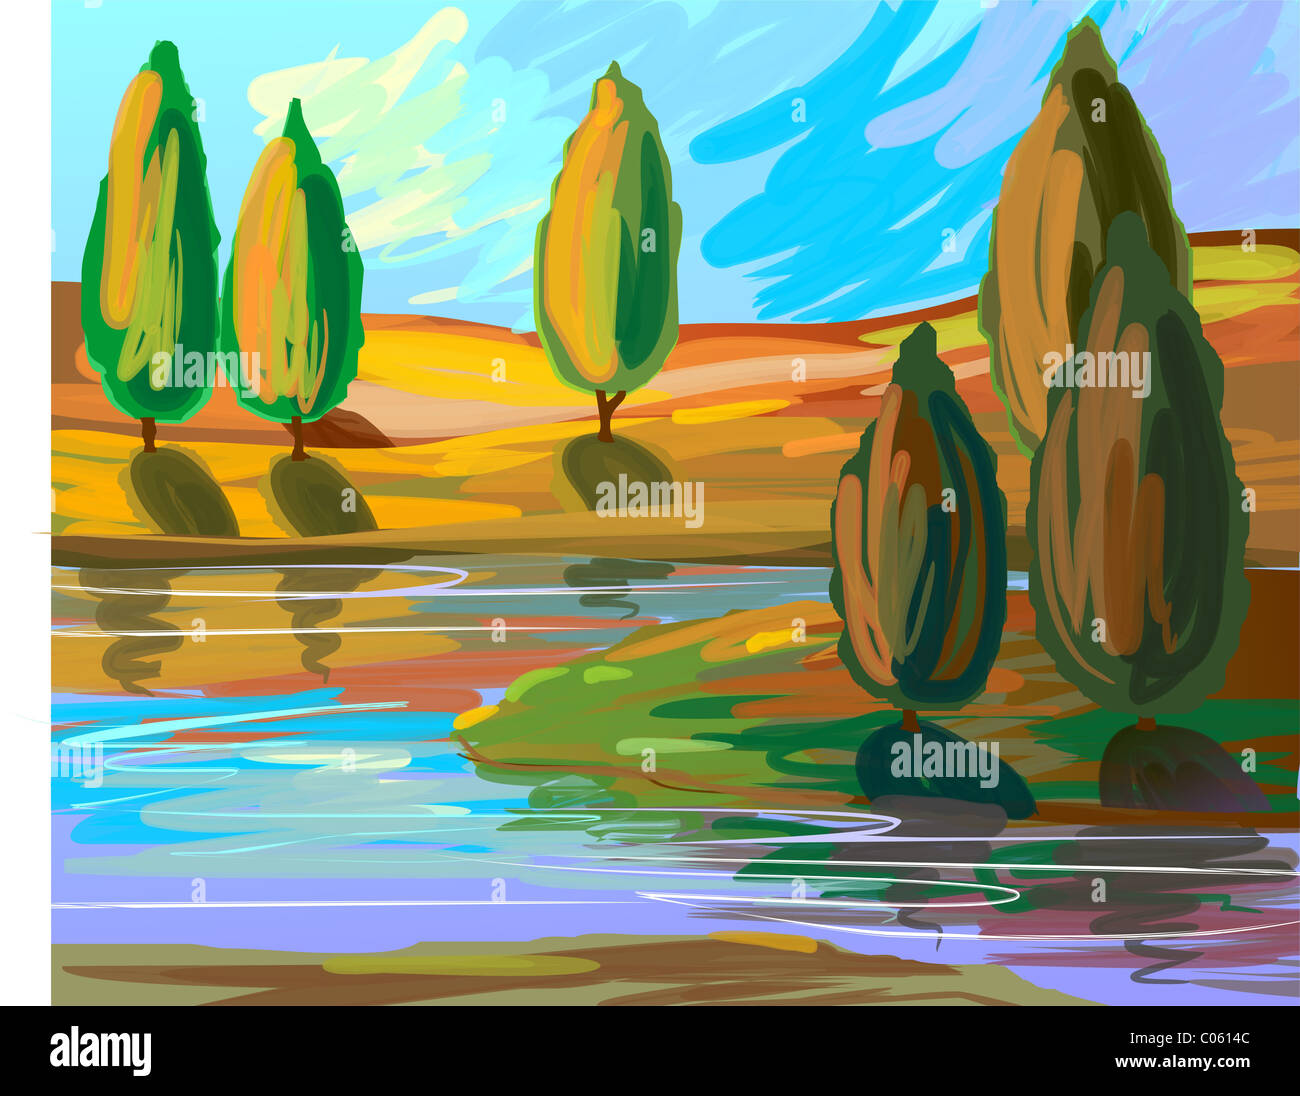 Digital painting of trees along the river side. The artist is experiencing the beauty of the scenery with trees and the river. Stock Photo